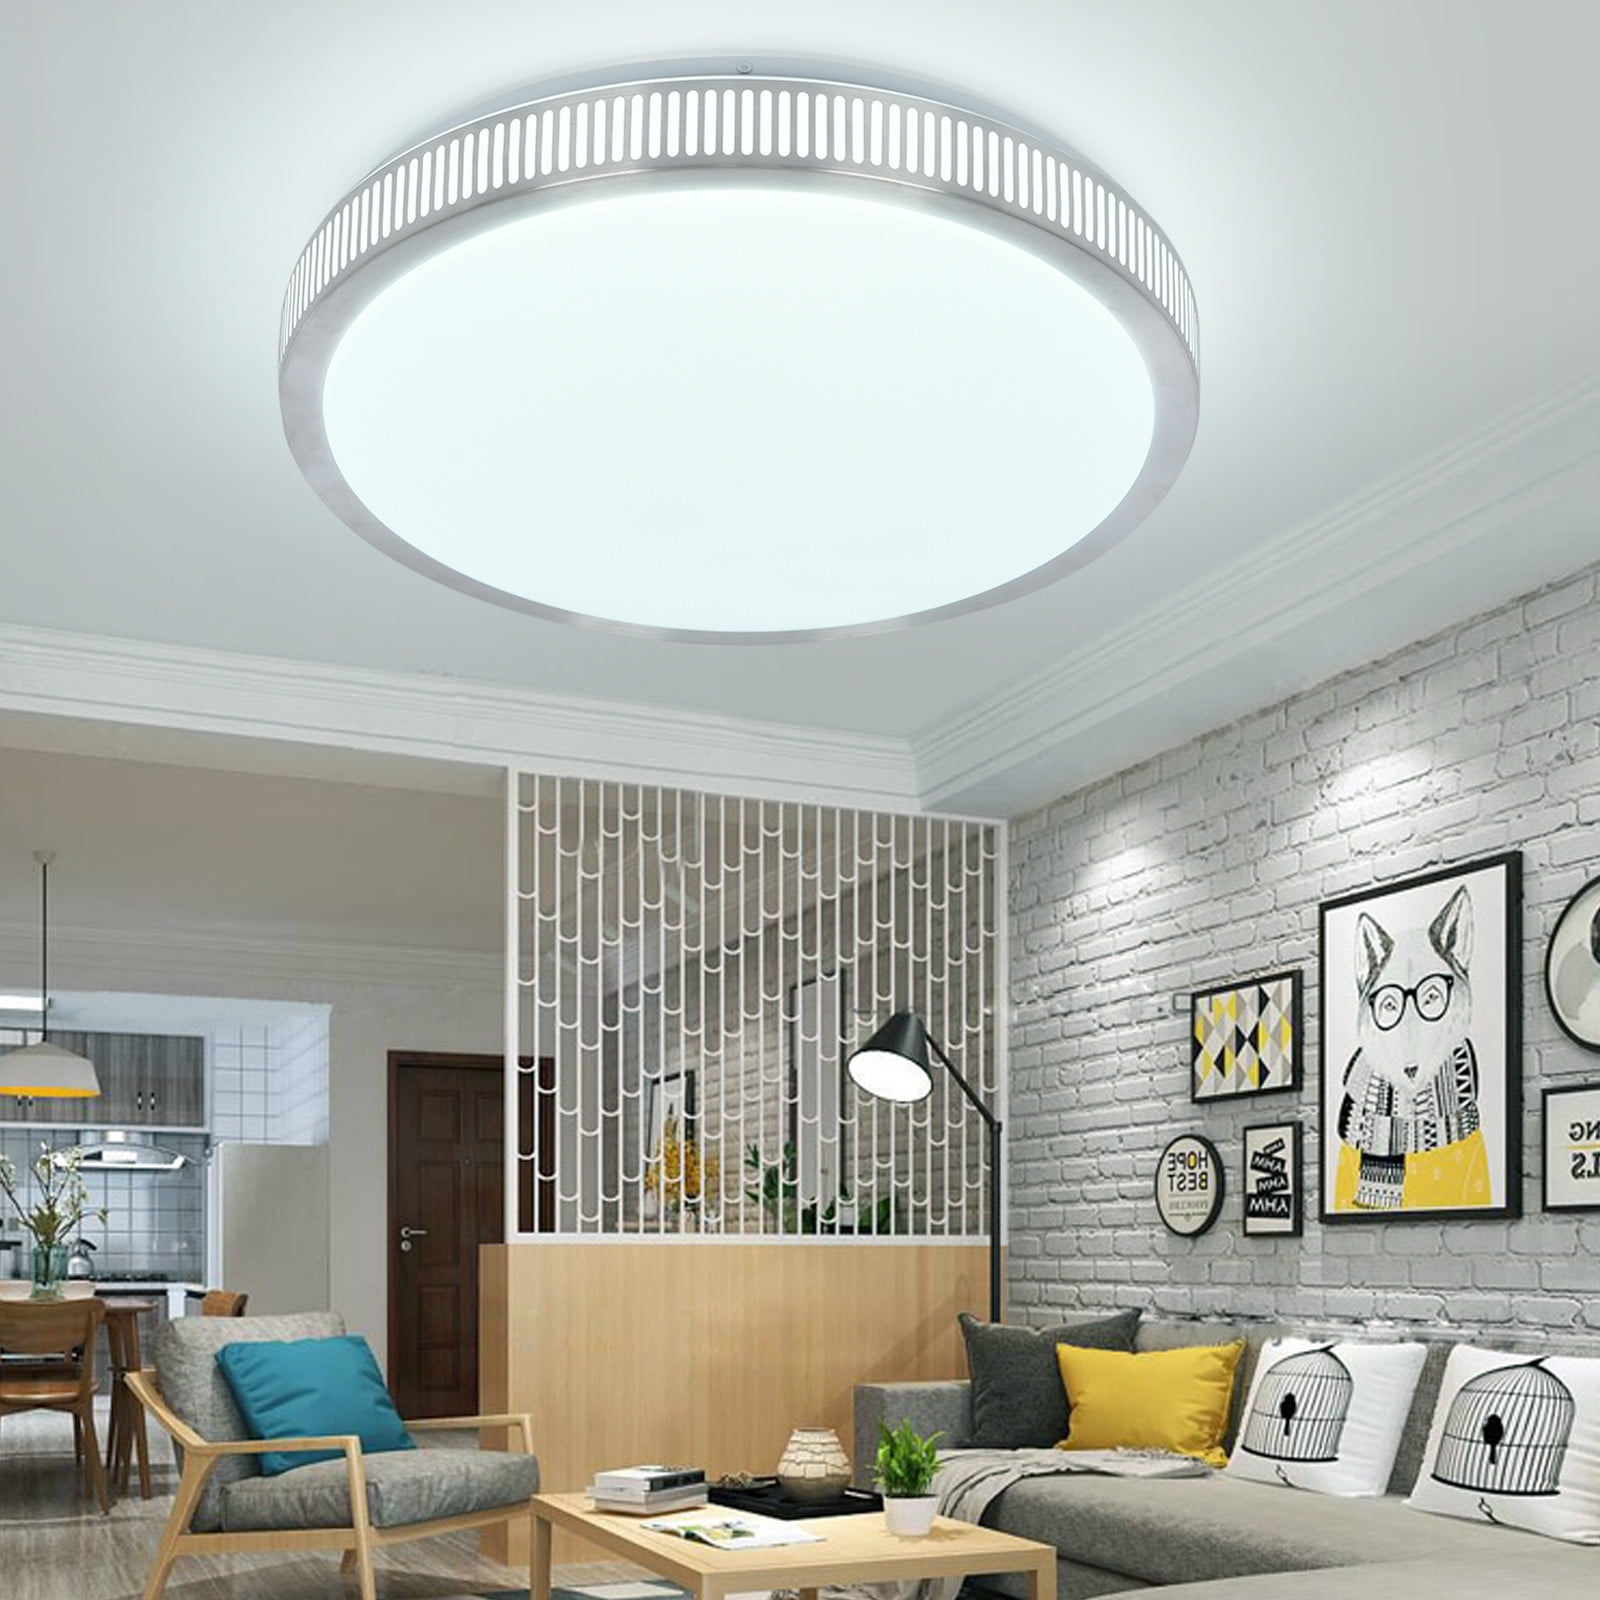 LED Ceiling Panel Lights Down Light Round Square Kitchen Bathroom Room Wall UK